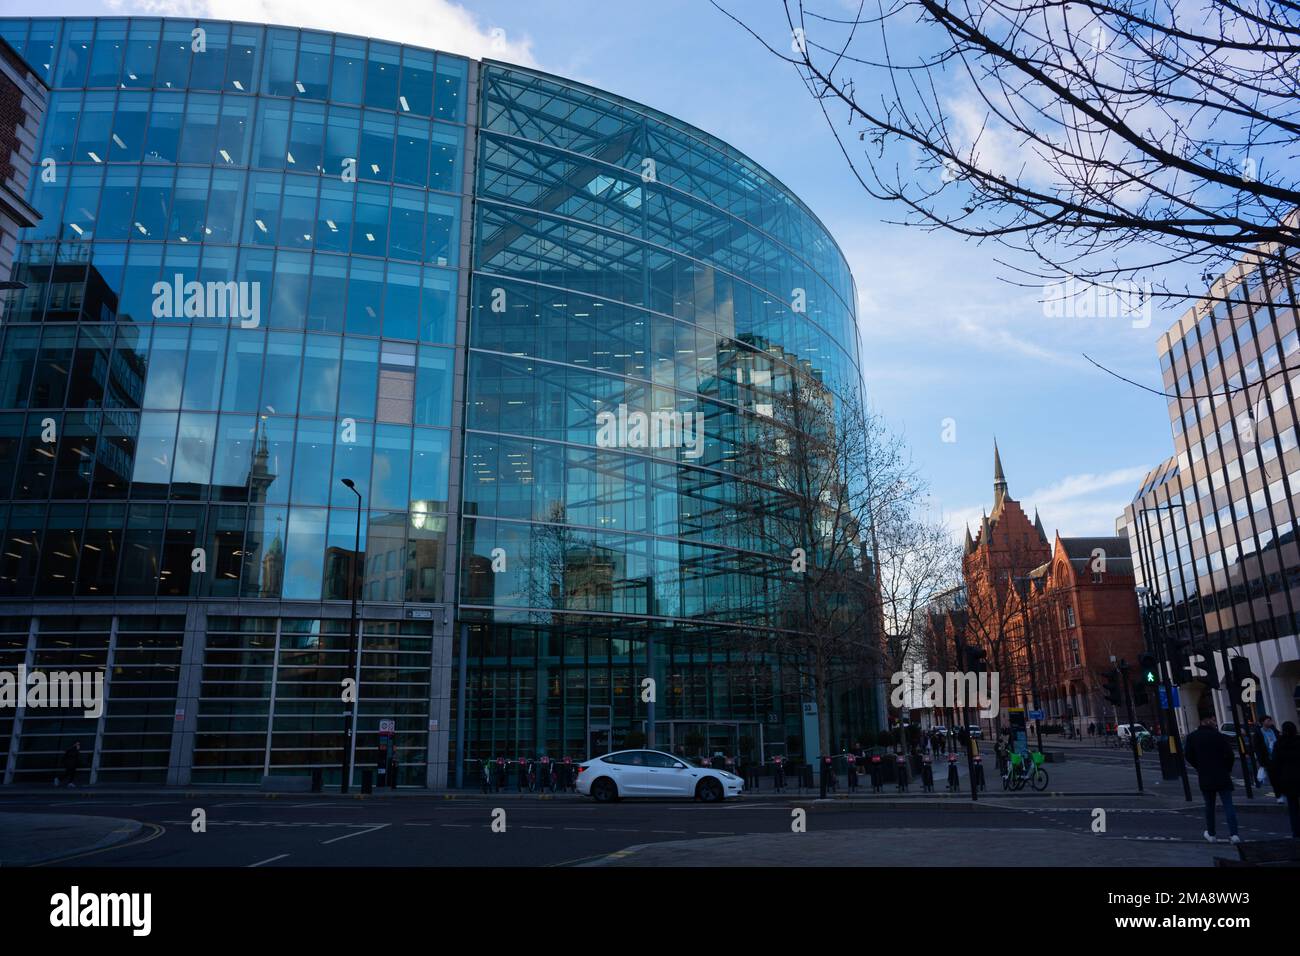 HQ building of the supermarket chain, Sainsbury's in Holborn, London Stock Photo